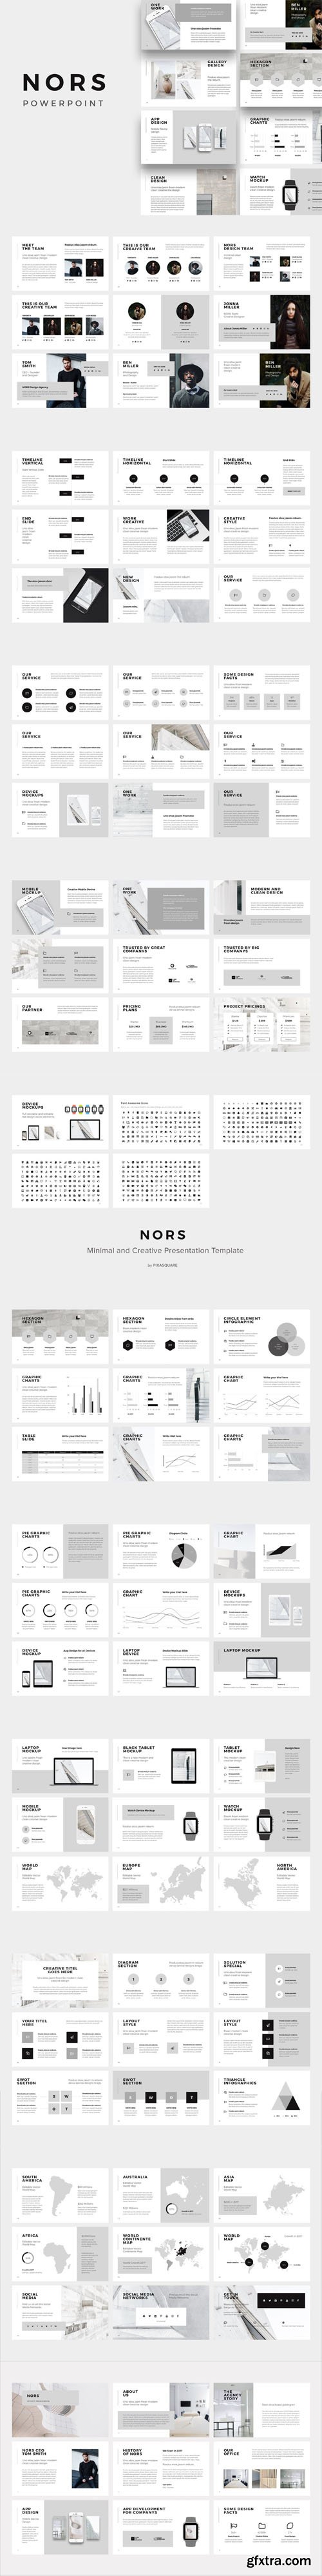 NORS - Powerpoint Presentation Template